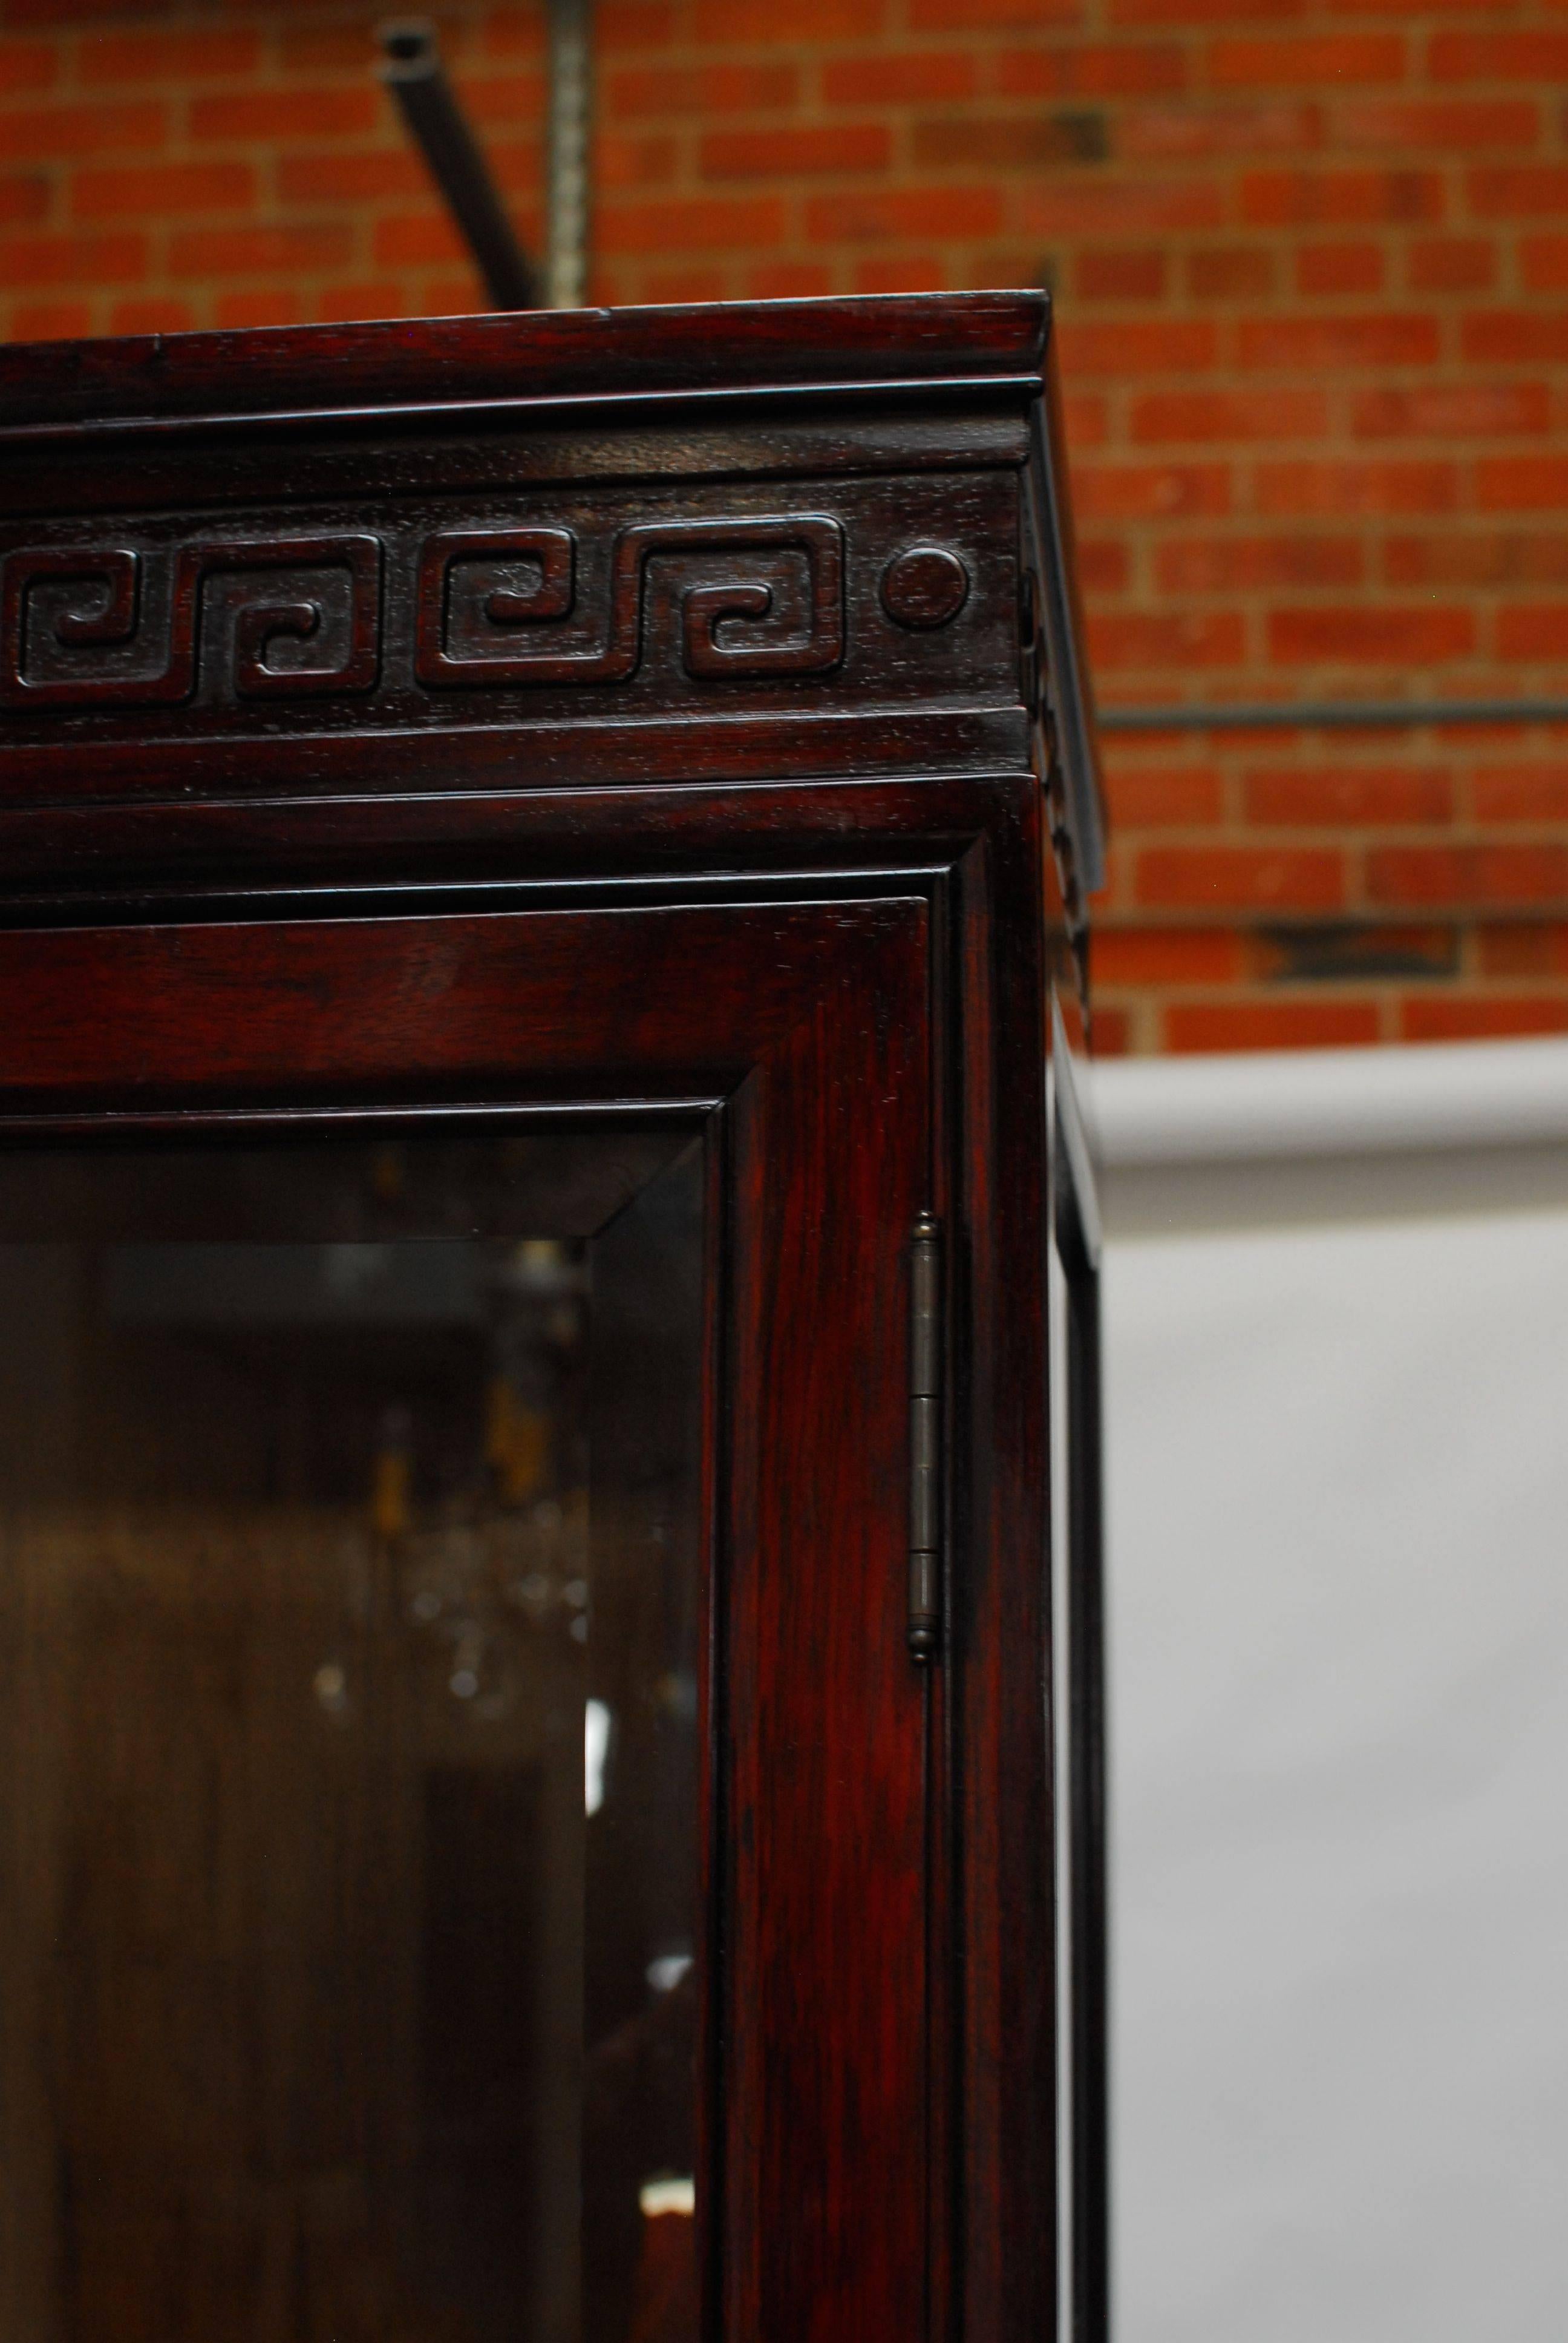 20th Century Rosewood Display Cabinet